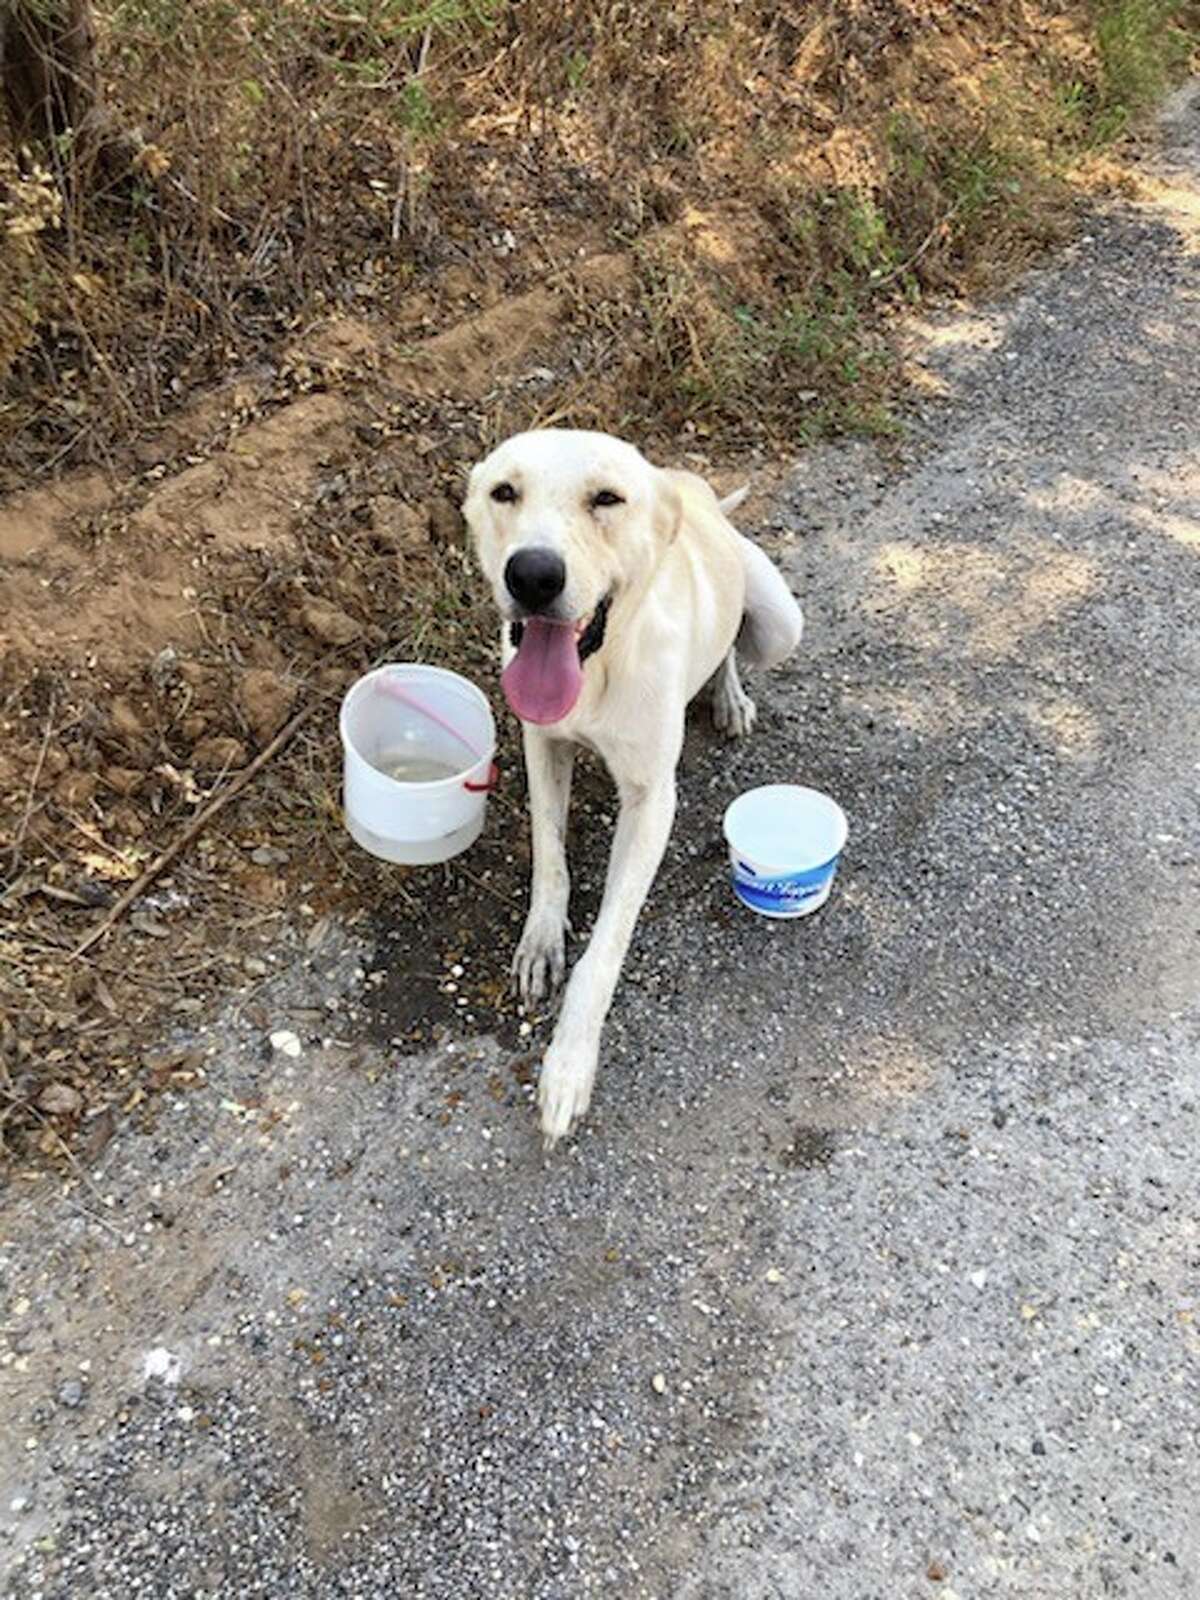 A yellow lab left abandoned along a road southwest of Poteet is being cared for at the Atascosa County Animal Shelter